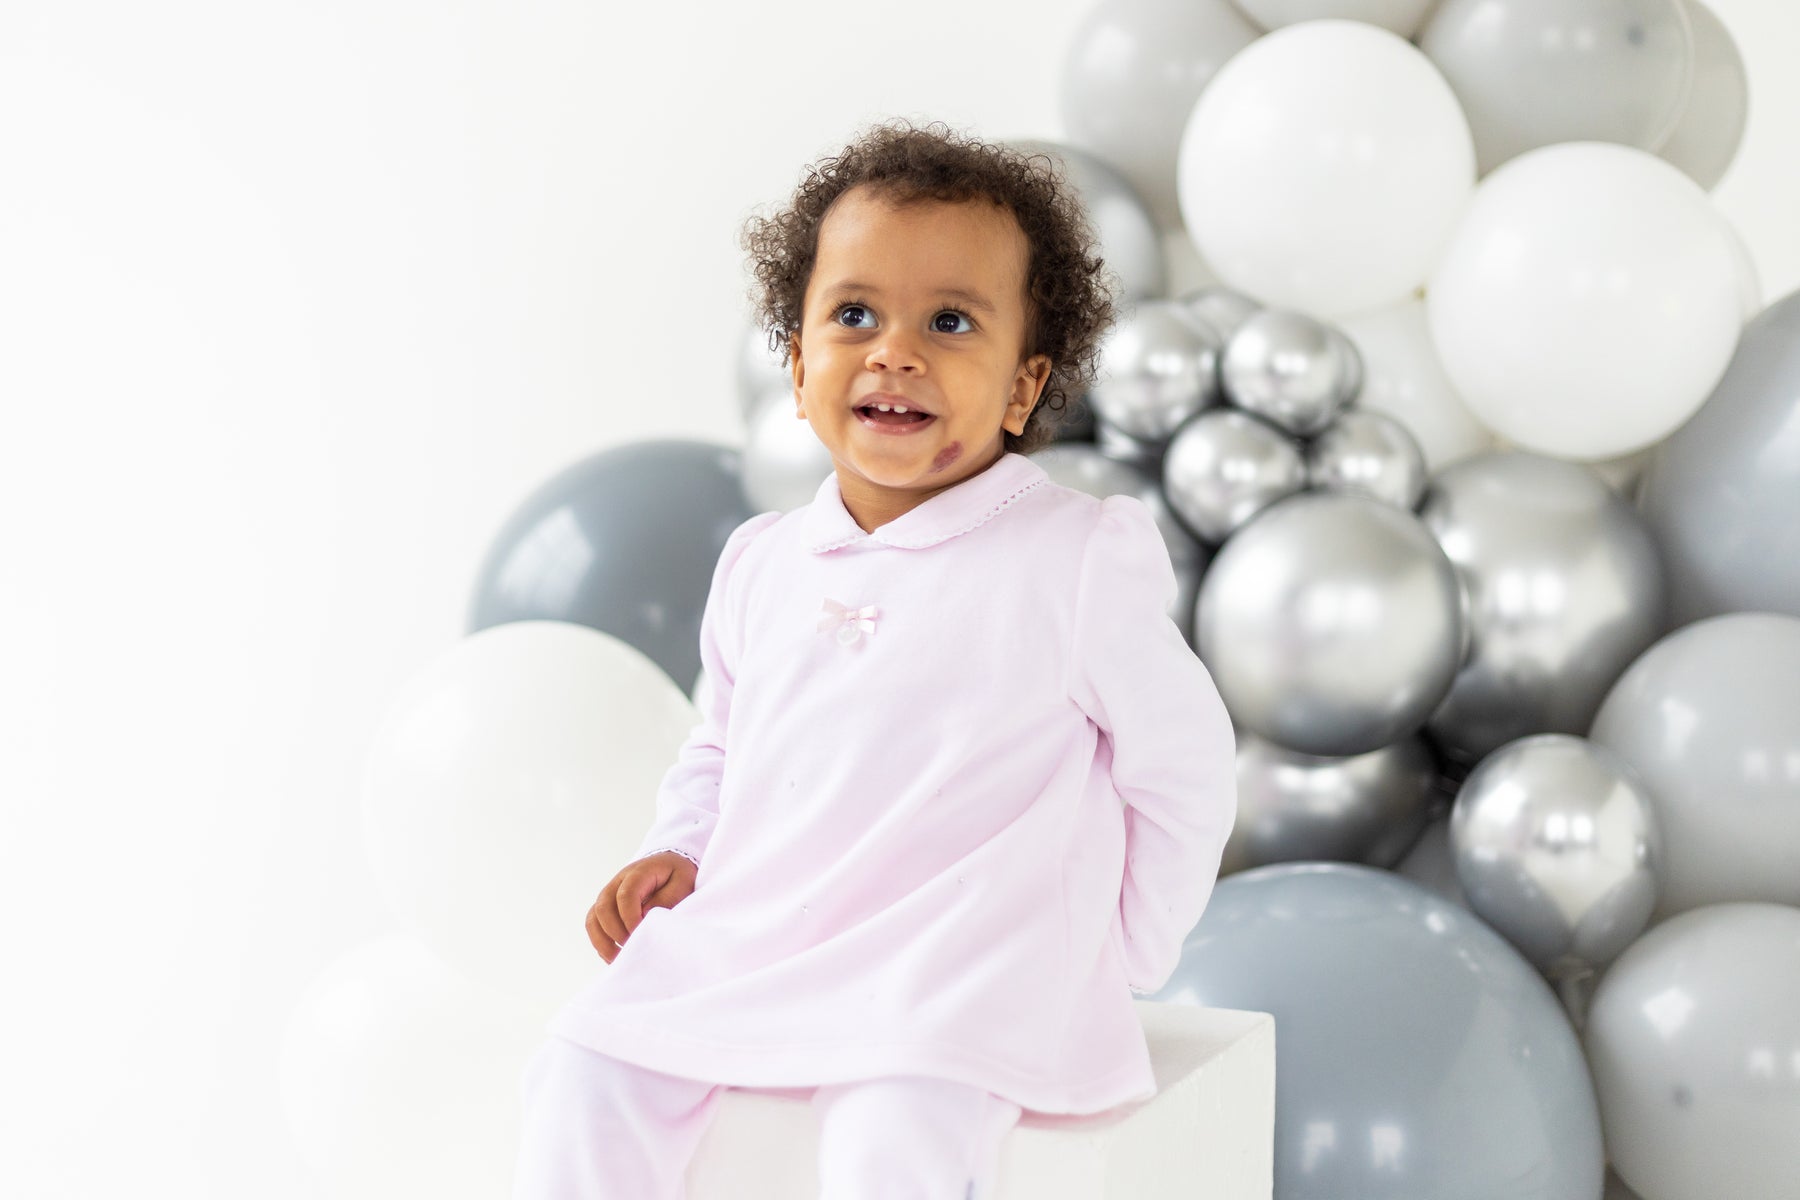 Blues Baby branded girls pink velour two piece legging set. This girls outfit comprises of a long tunic top with a small bow in the middle and matching leggings which have small bows on the ankles. Available in sizes 3 month up to 12 month.